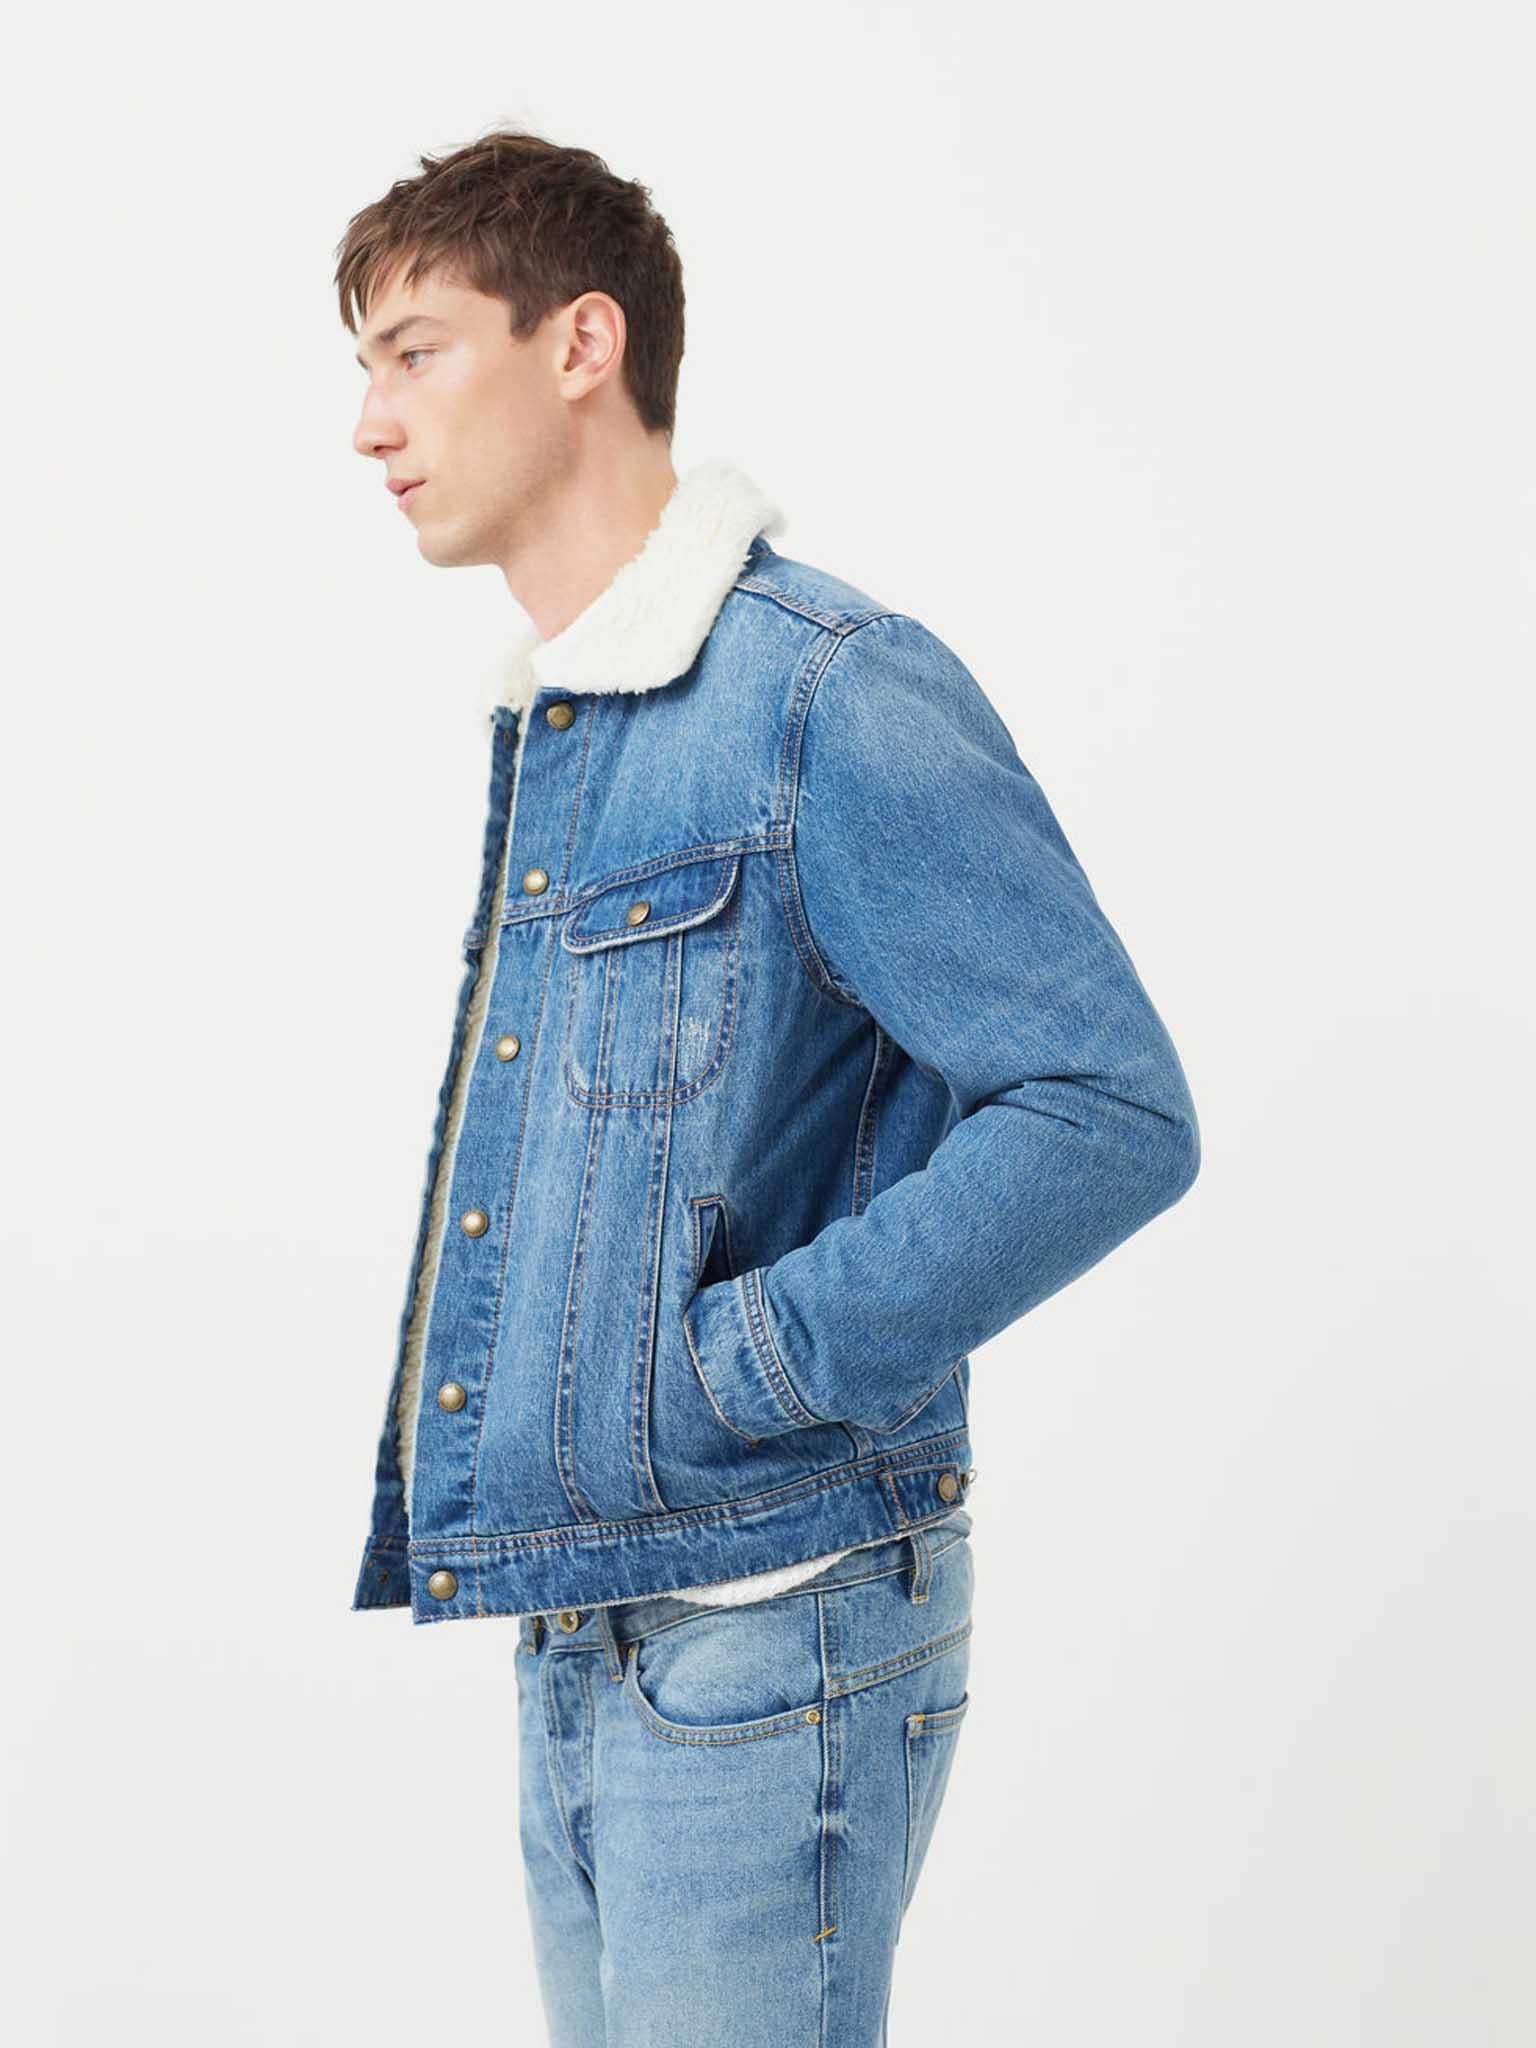 The fur-lined denim of the ‘80s is still popular decades later, £69.99, mango.com